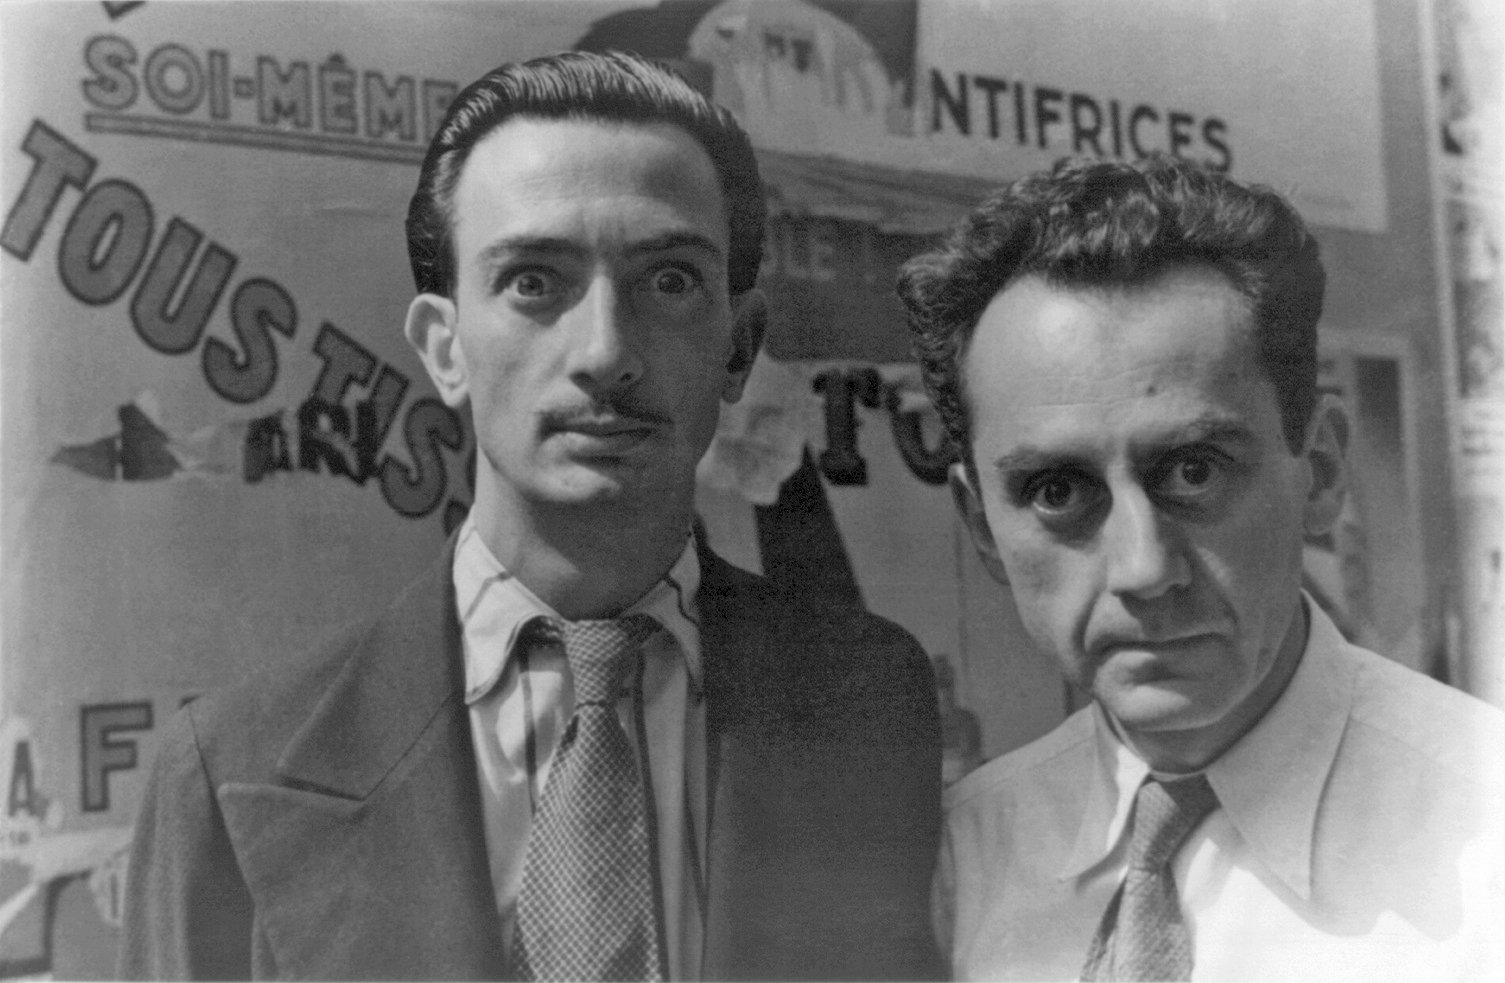 Dalí (left) and Man Ray in Paris, June, 1934